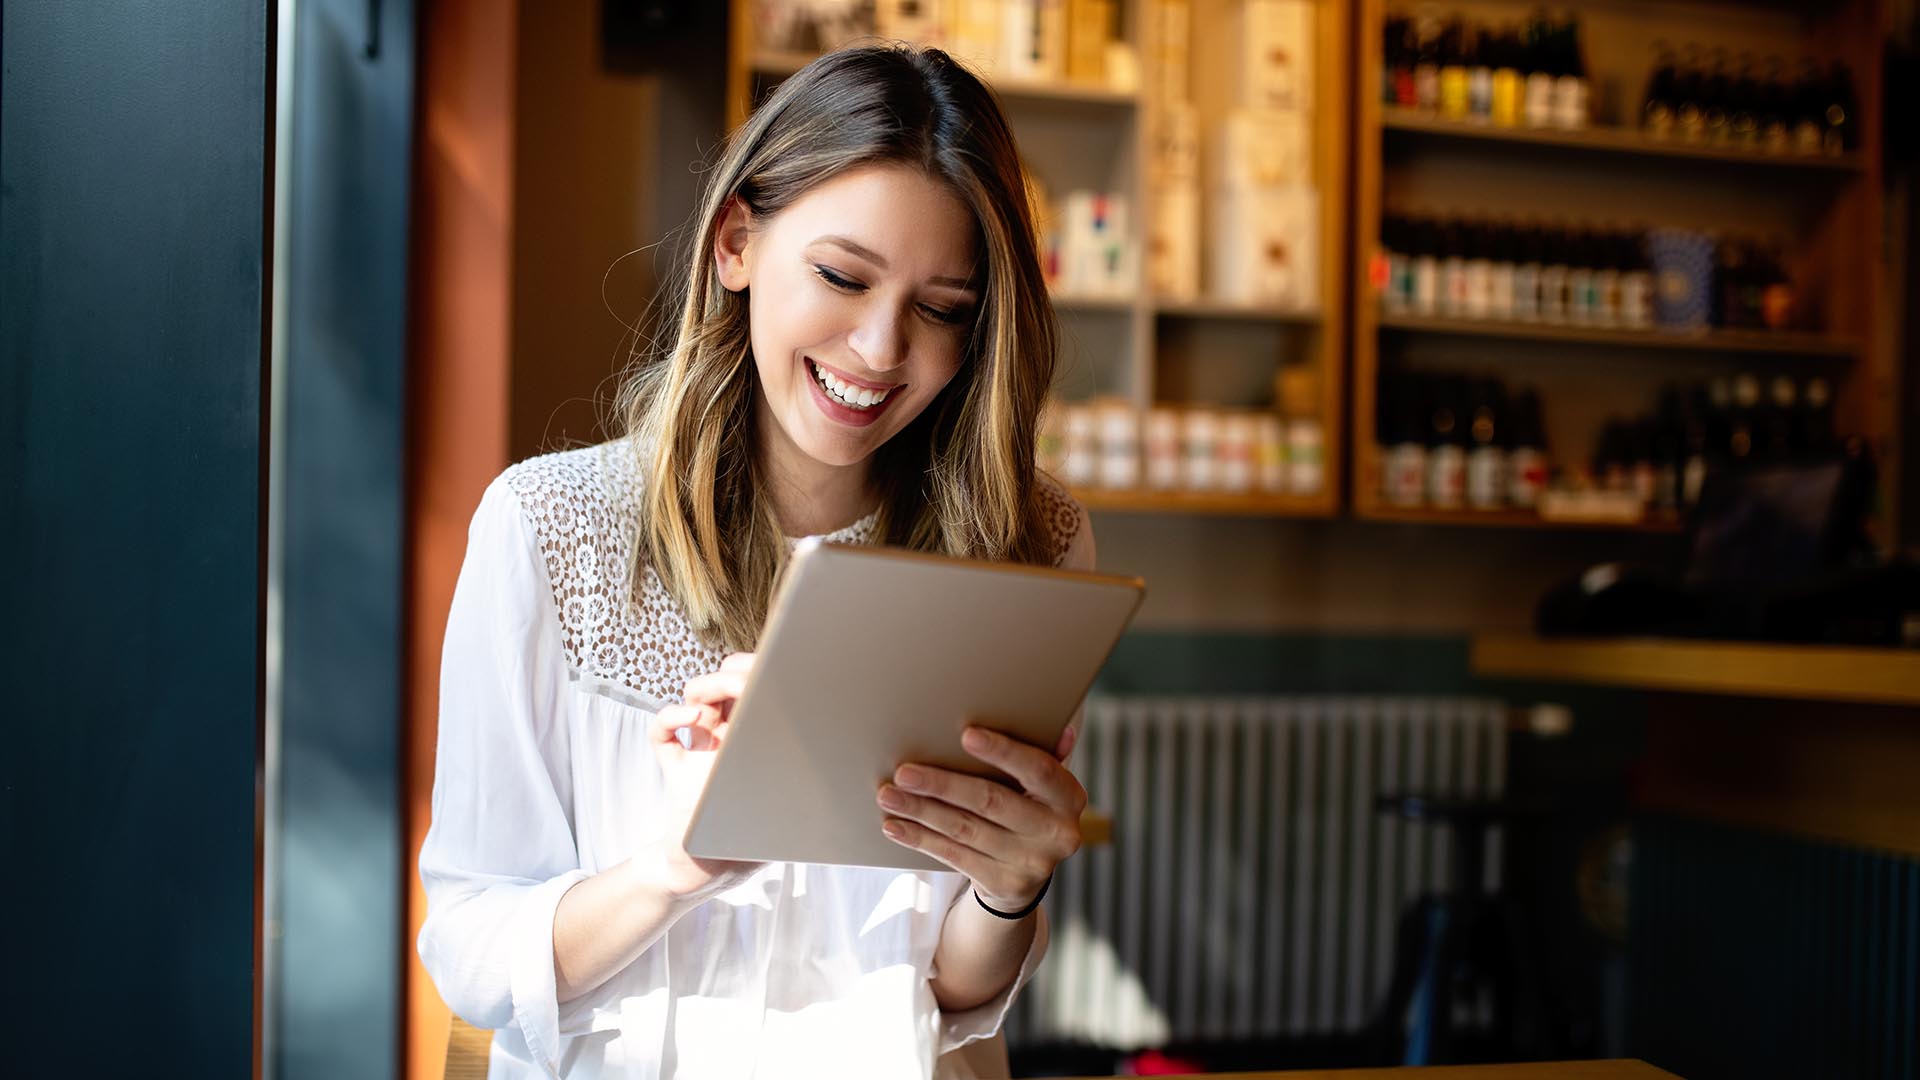 A woman is smiling while looking at her tablet.